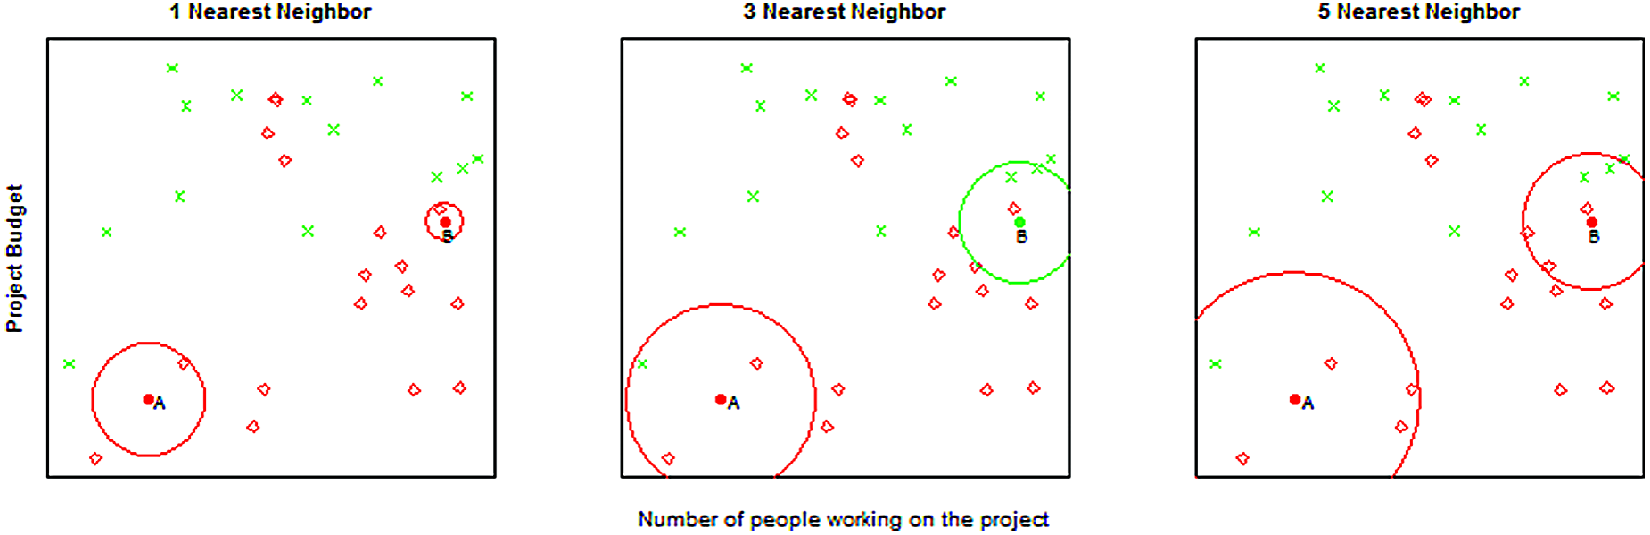 Example of $k$-nearest neighbor with $k = 1, 3, 5$ neighbors. We want to predict the points A and B. The 1-nearest neighbor for both points is red ("Patent not granted"), the 3-nearest neighbor predicts point A (B) to be red (green) with probability 2/3, and the 5-nearest neighbor predicts again both points to be red with probabilities 4/5 and 3/5, respectively.